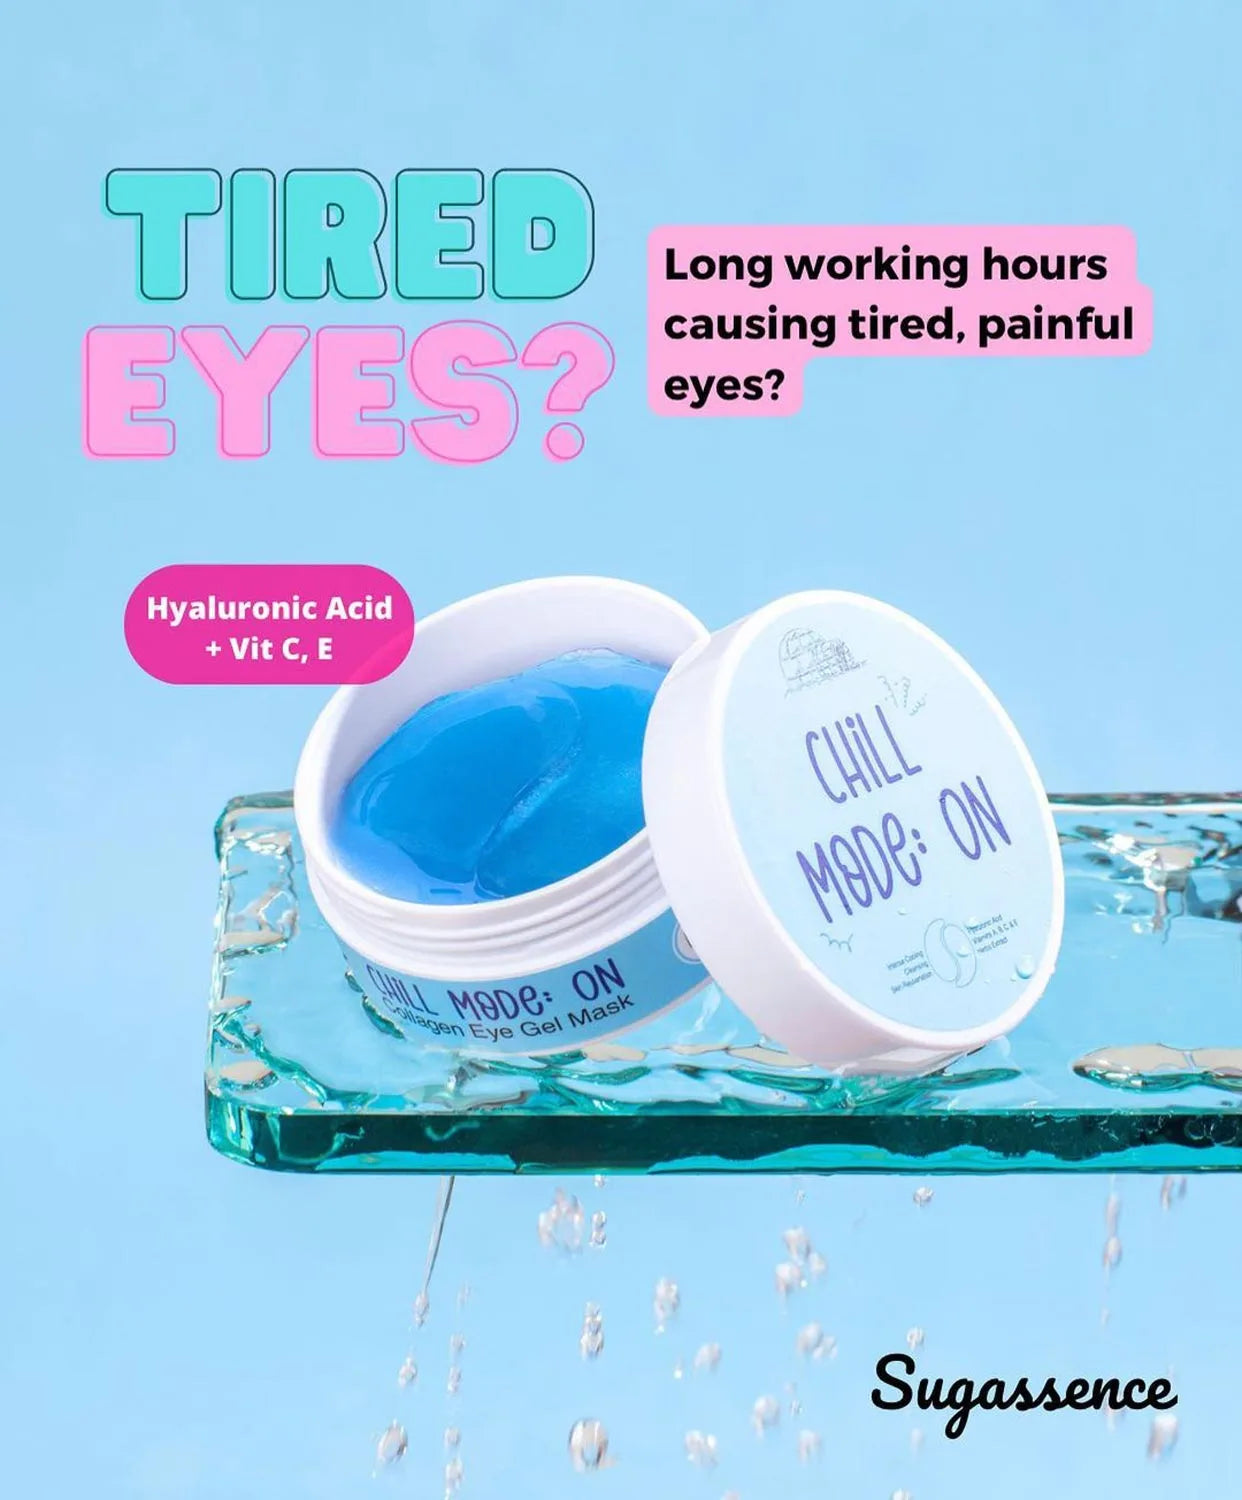 Chill Mode: ON Eye Gel Patches